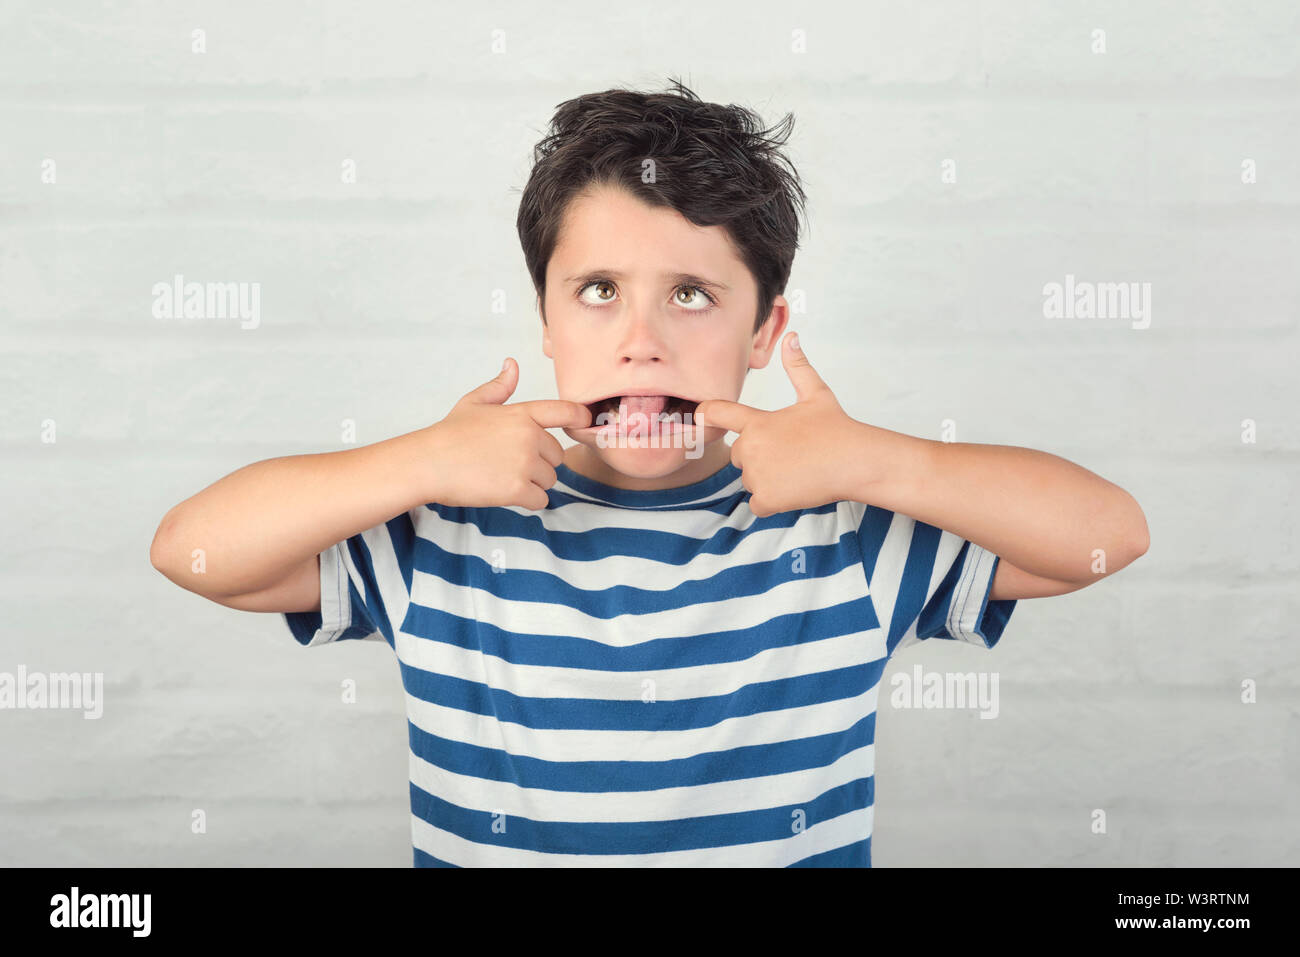 rude child making a grimace against brick background Stock Photo